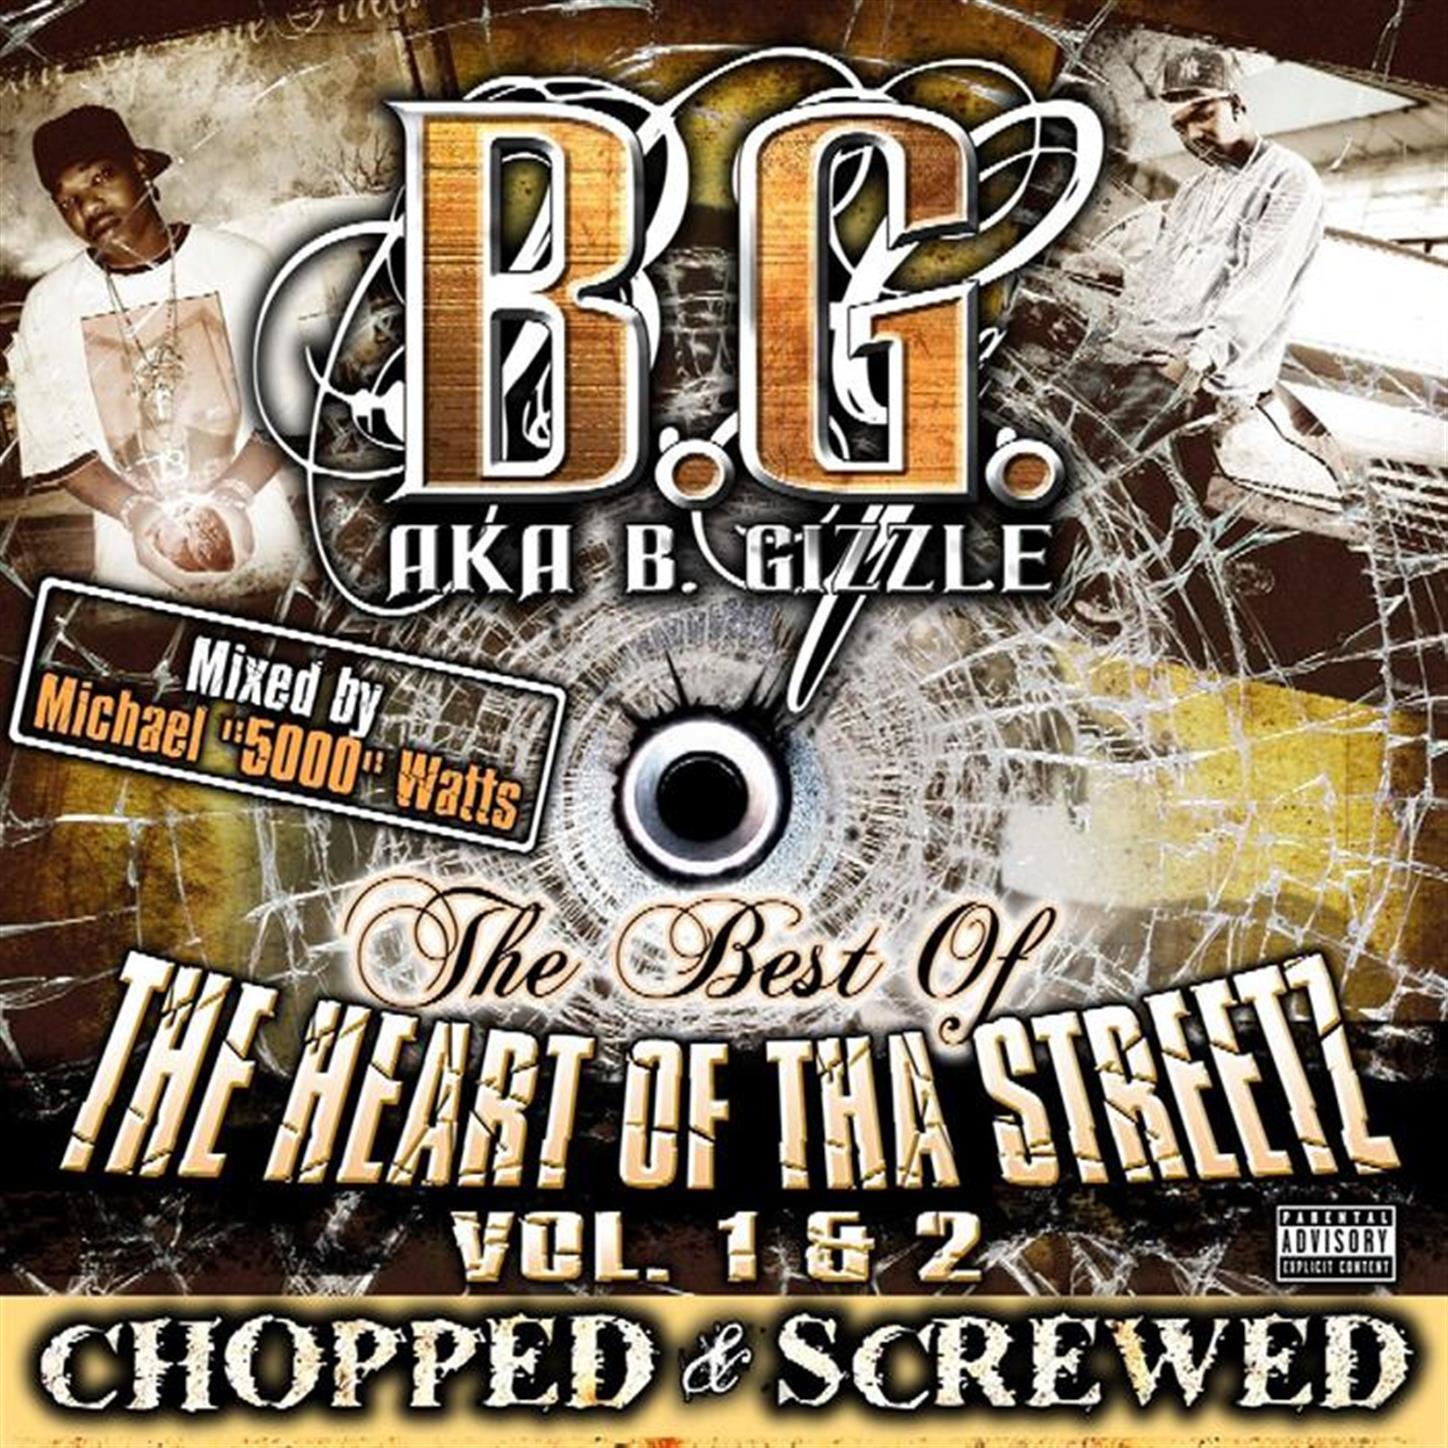 The Best Of Tha Heart Of The Streetz Volume 1 & 2 (Chopped & Screwed)